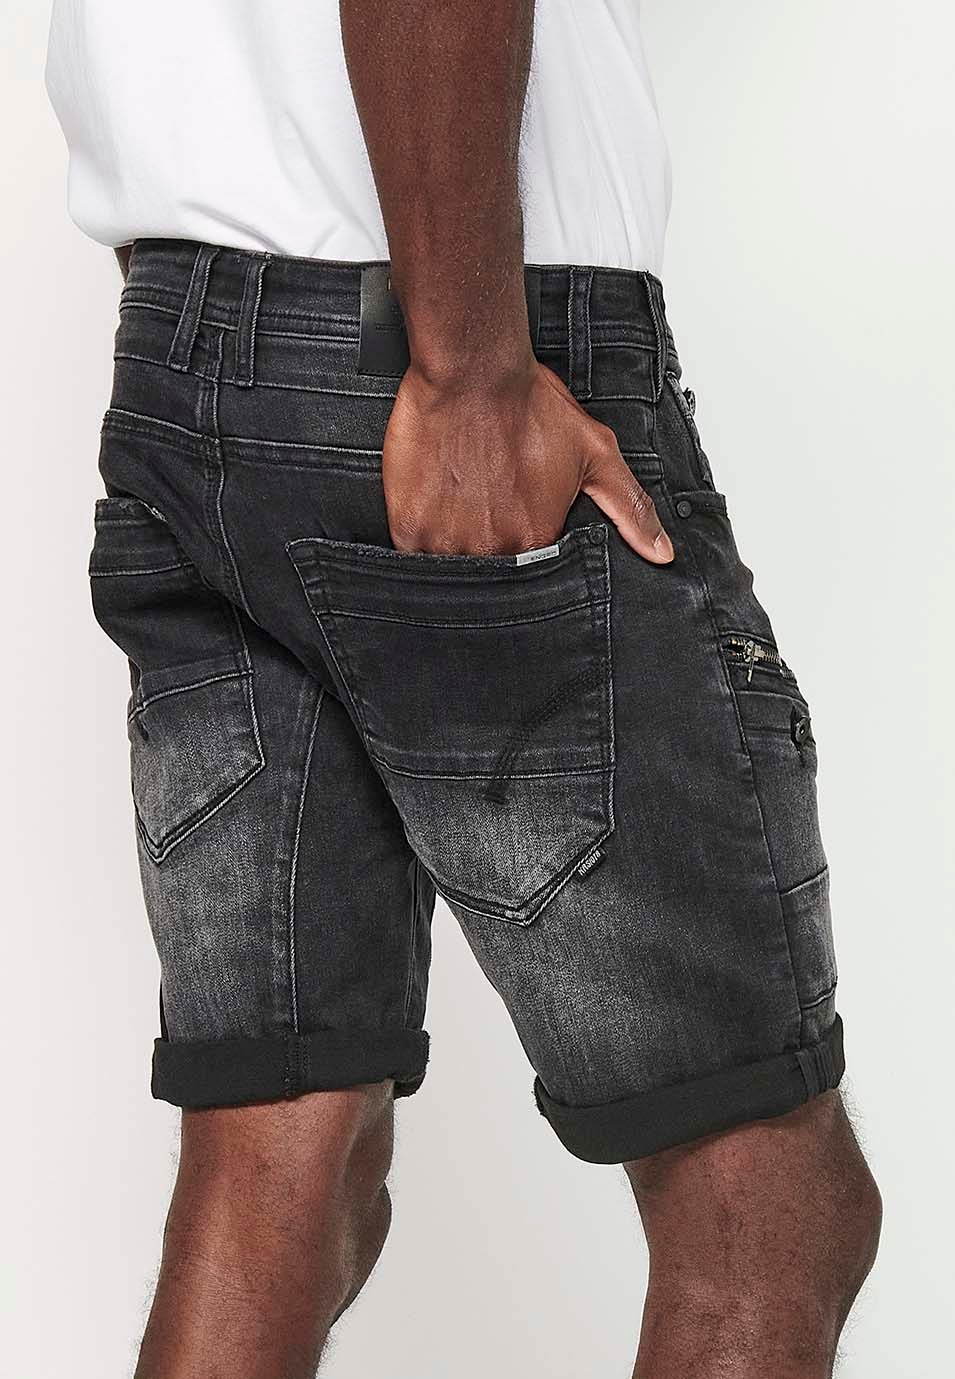 Shorts with Turn-up Finish and Front Closure with Zipper and Button with Five Pockets, One Pocket Pocket and Front Details in Black for Men 2